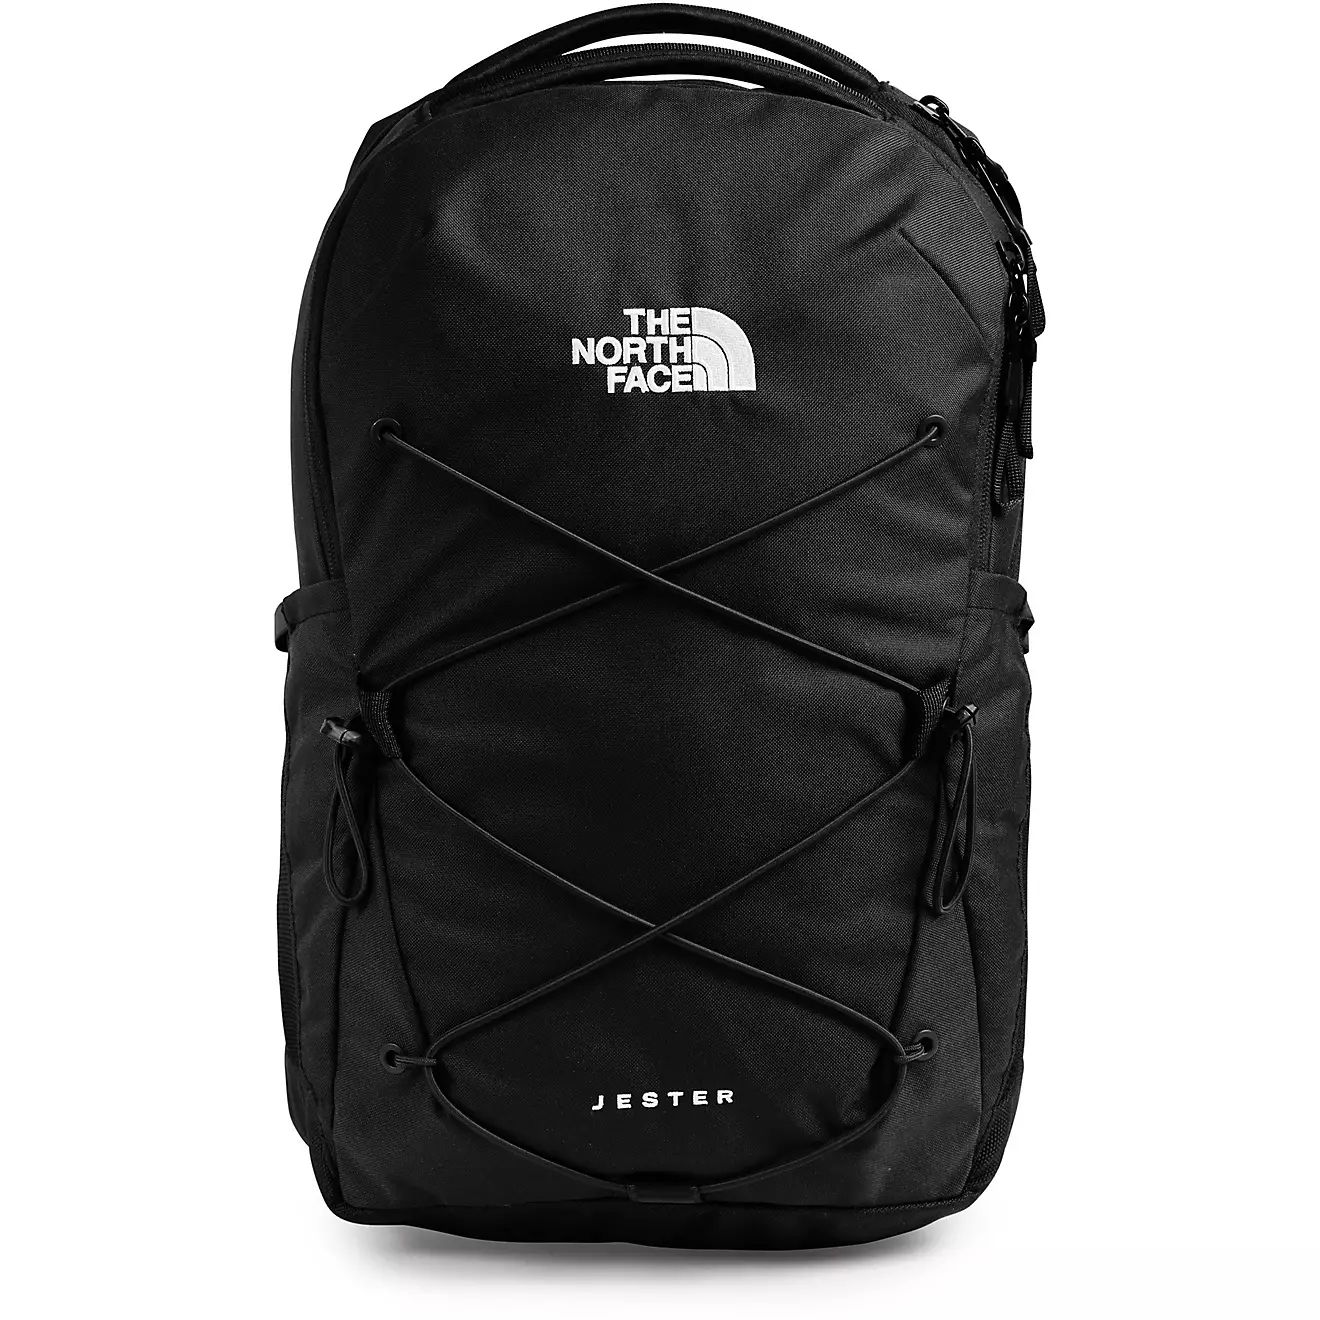 The North Face Women's Jester Backpack | Academy Sports + Outdoors